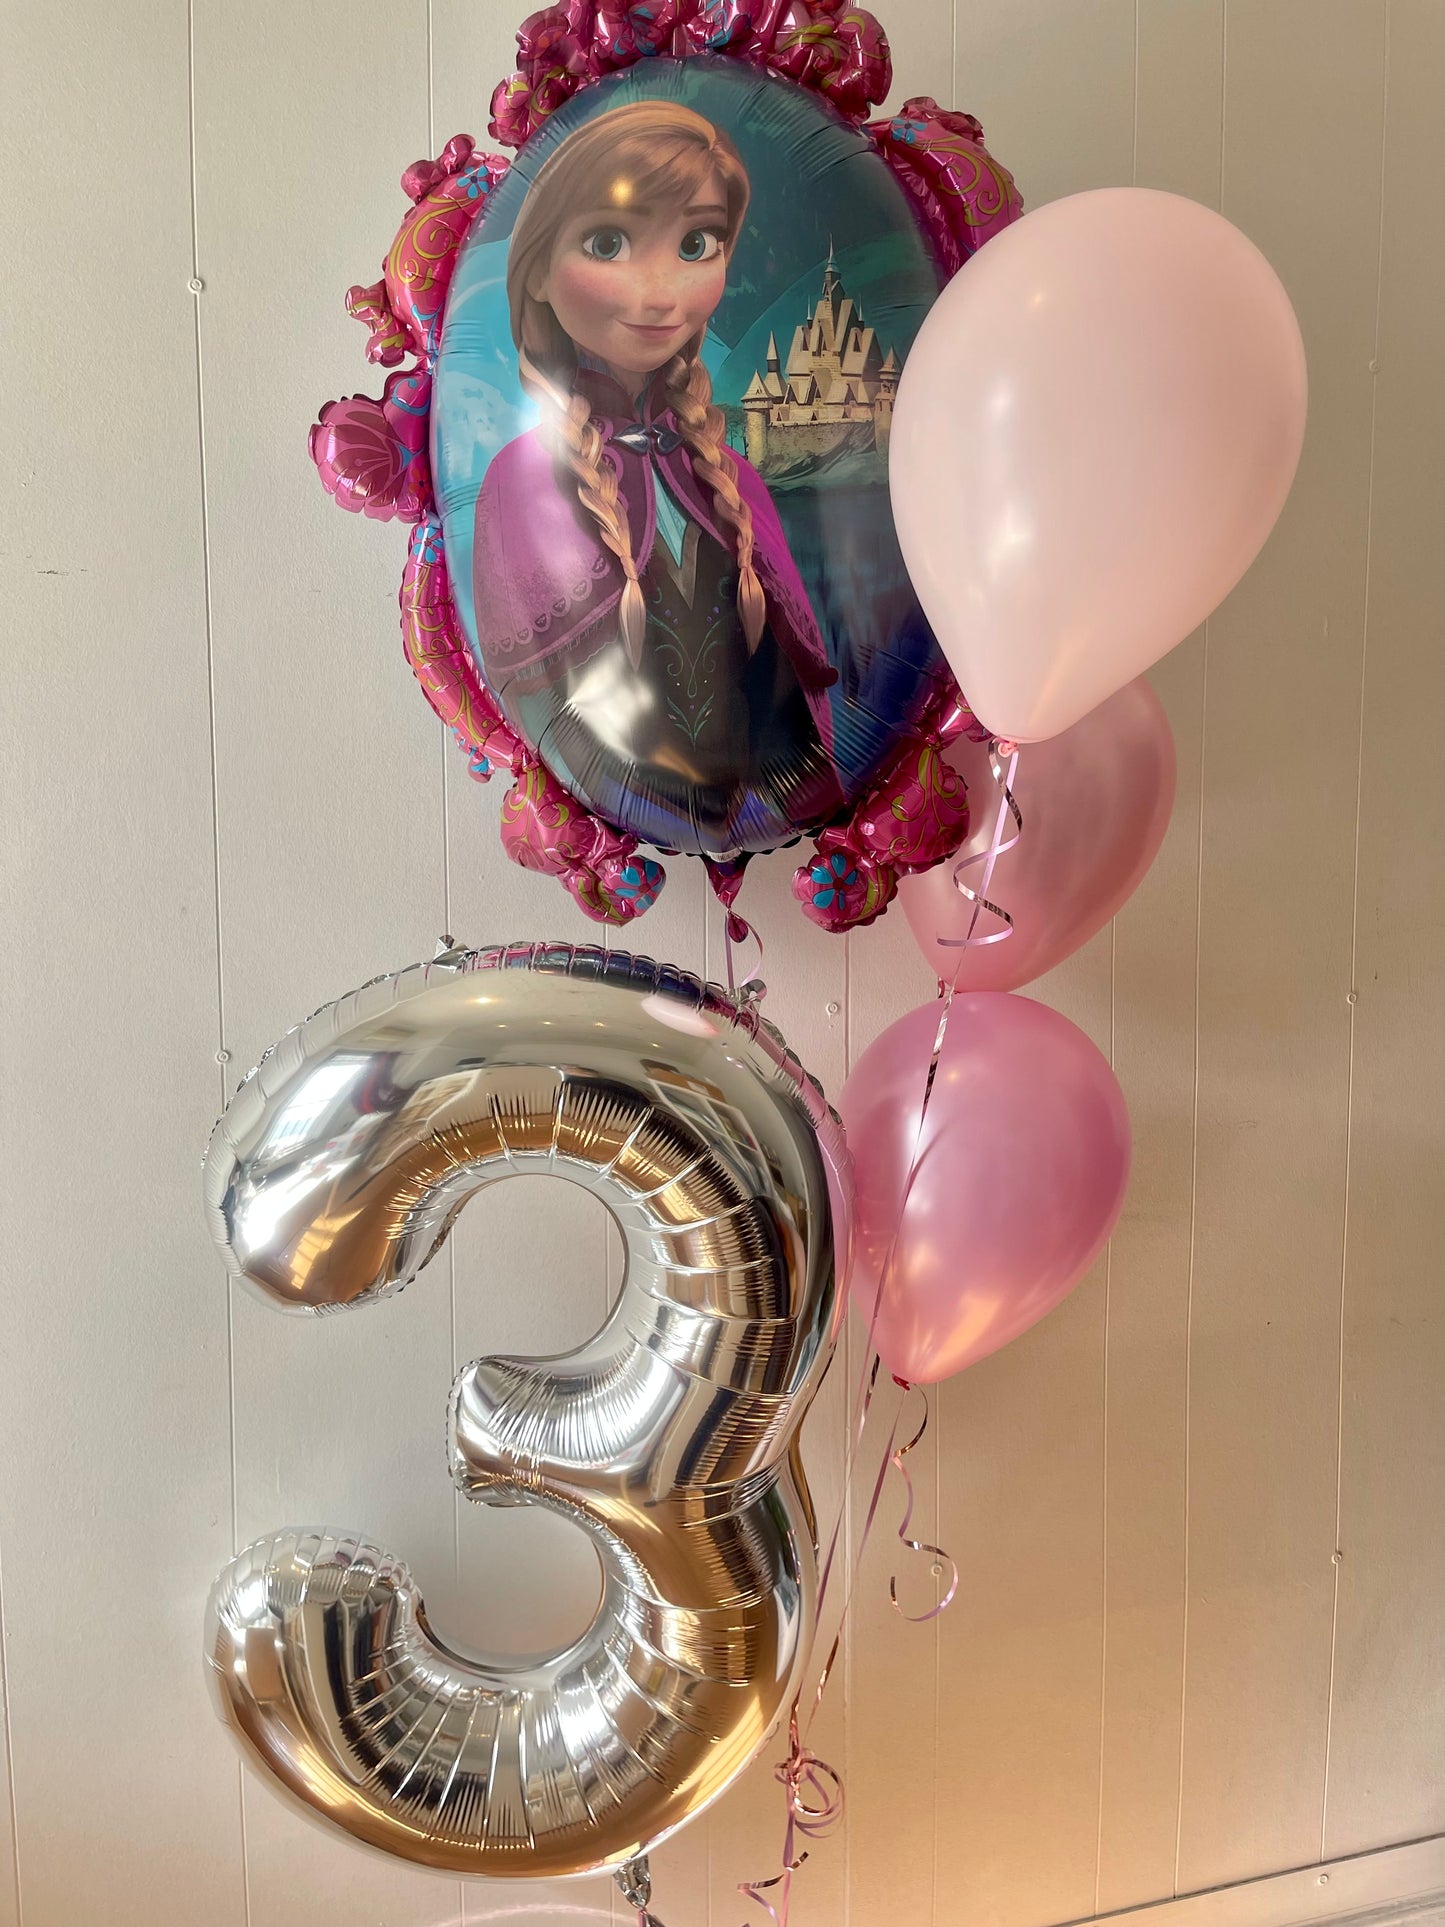 Frozen, large number and 3 latex balloons